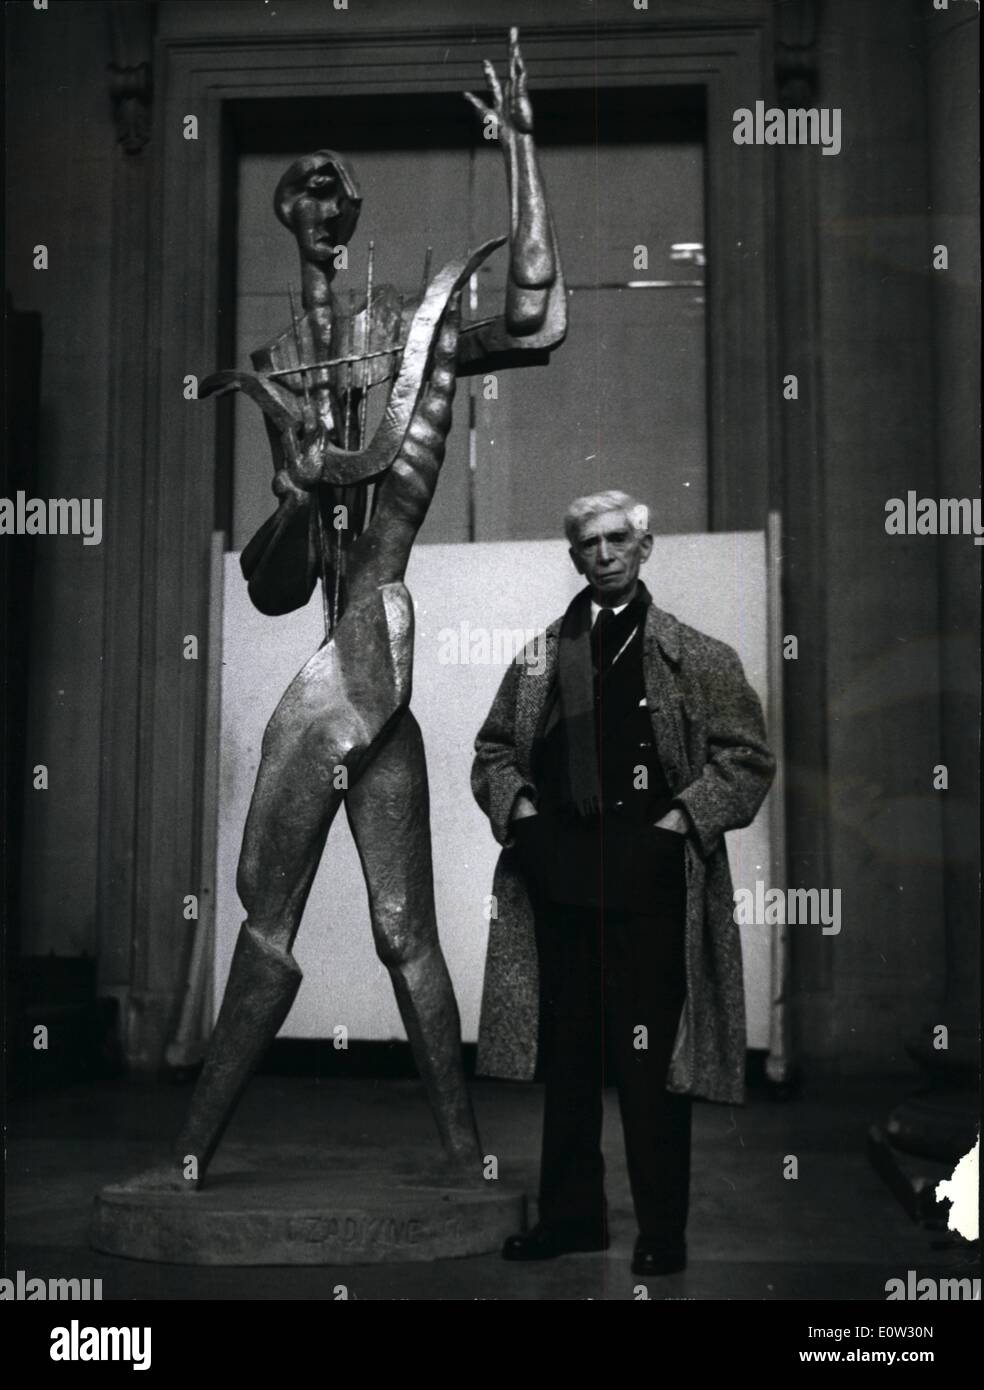 Jan. 01, 1961 - WORKS BY RUSSIAN BORN SCULPTOR - ON SHOW IN LONDON. Eighty-three exhibits by Russian born Ossip Zadkine - said to be one of the greatest modern sculptors of the day - are being shown at the Tate Gallery in London. This is the first major exhibition of his works here - but they have been seen in New York and Paris etc.. The exhibition shows his progress as a sculptor from 1954 to the present day. Keystone Photo Shows:- Ossip Zadkine the sculptor with ''Orpheus'' - a sculpture in bronze - at the Tate Gallery. This is an example of his later work - and is more than six feet tall. Stock Photo